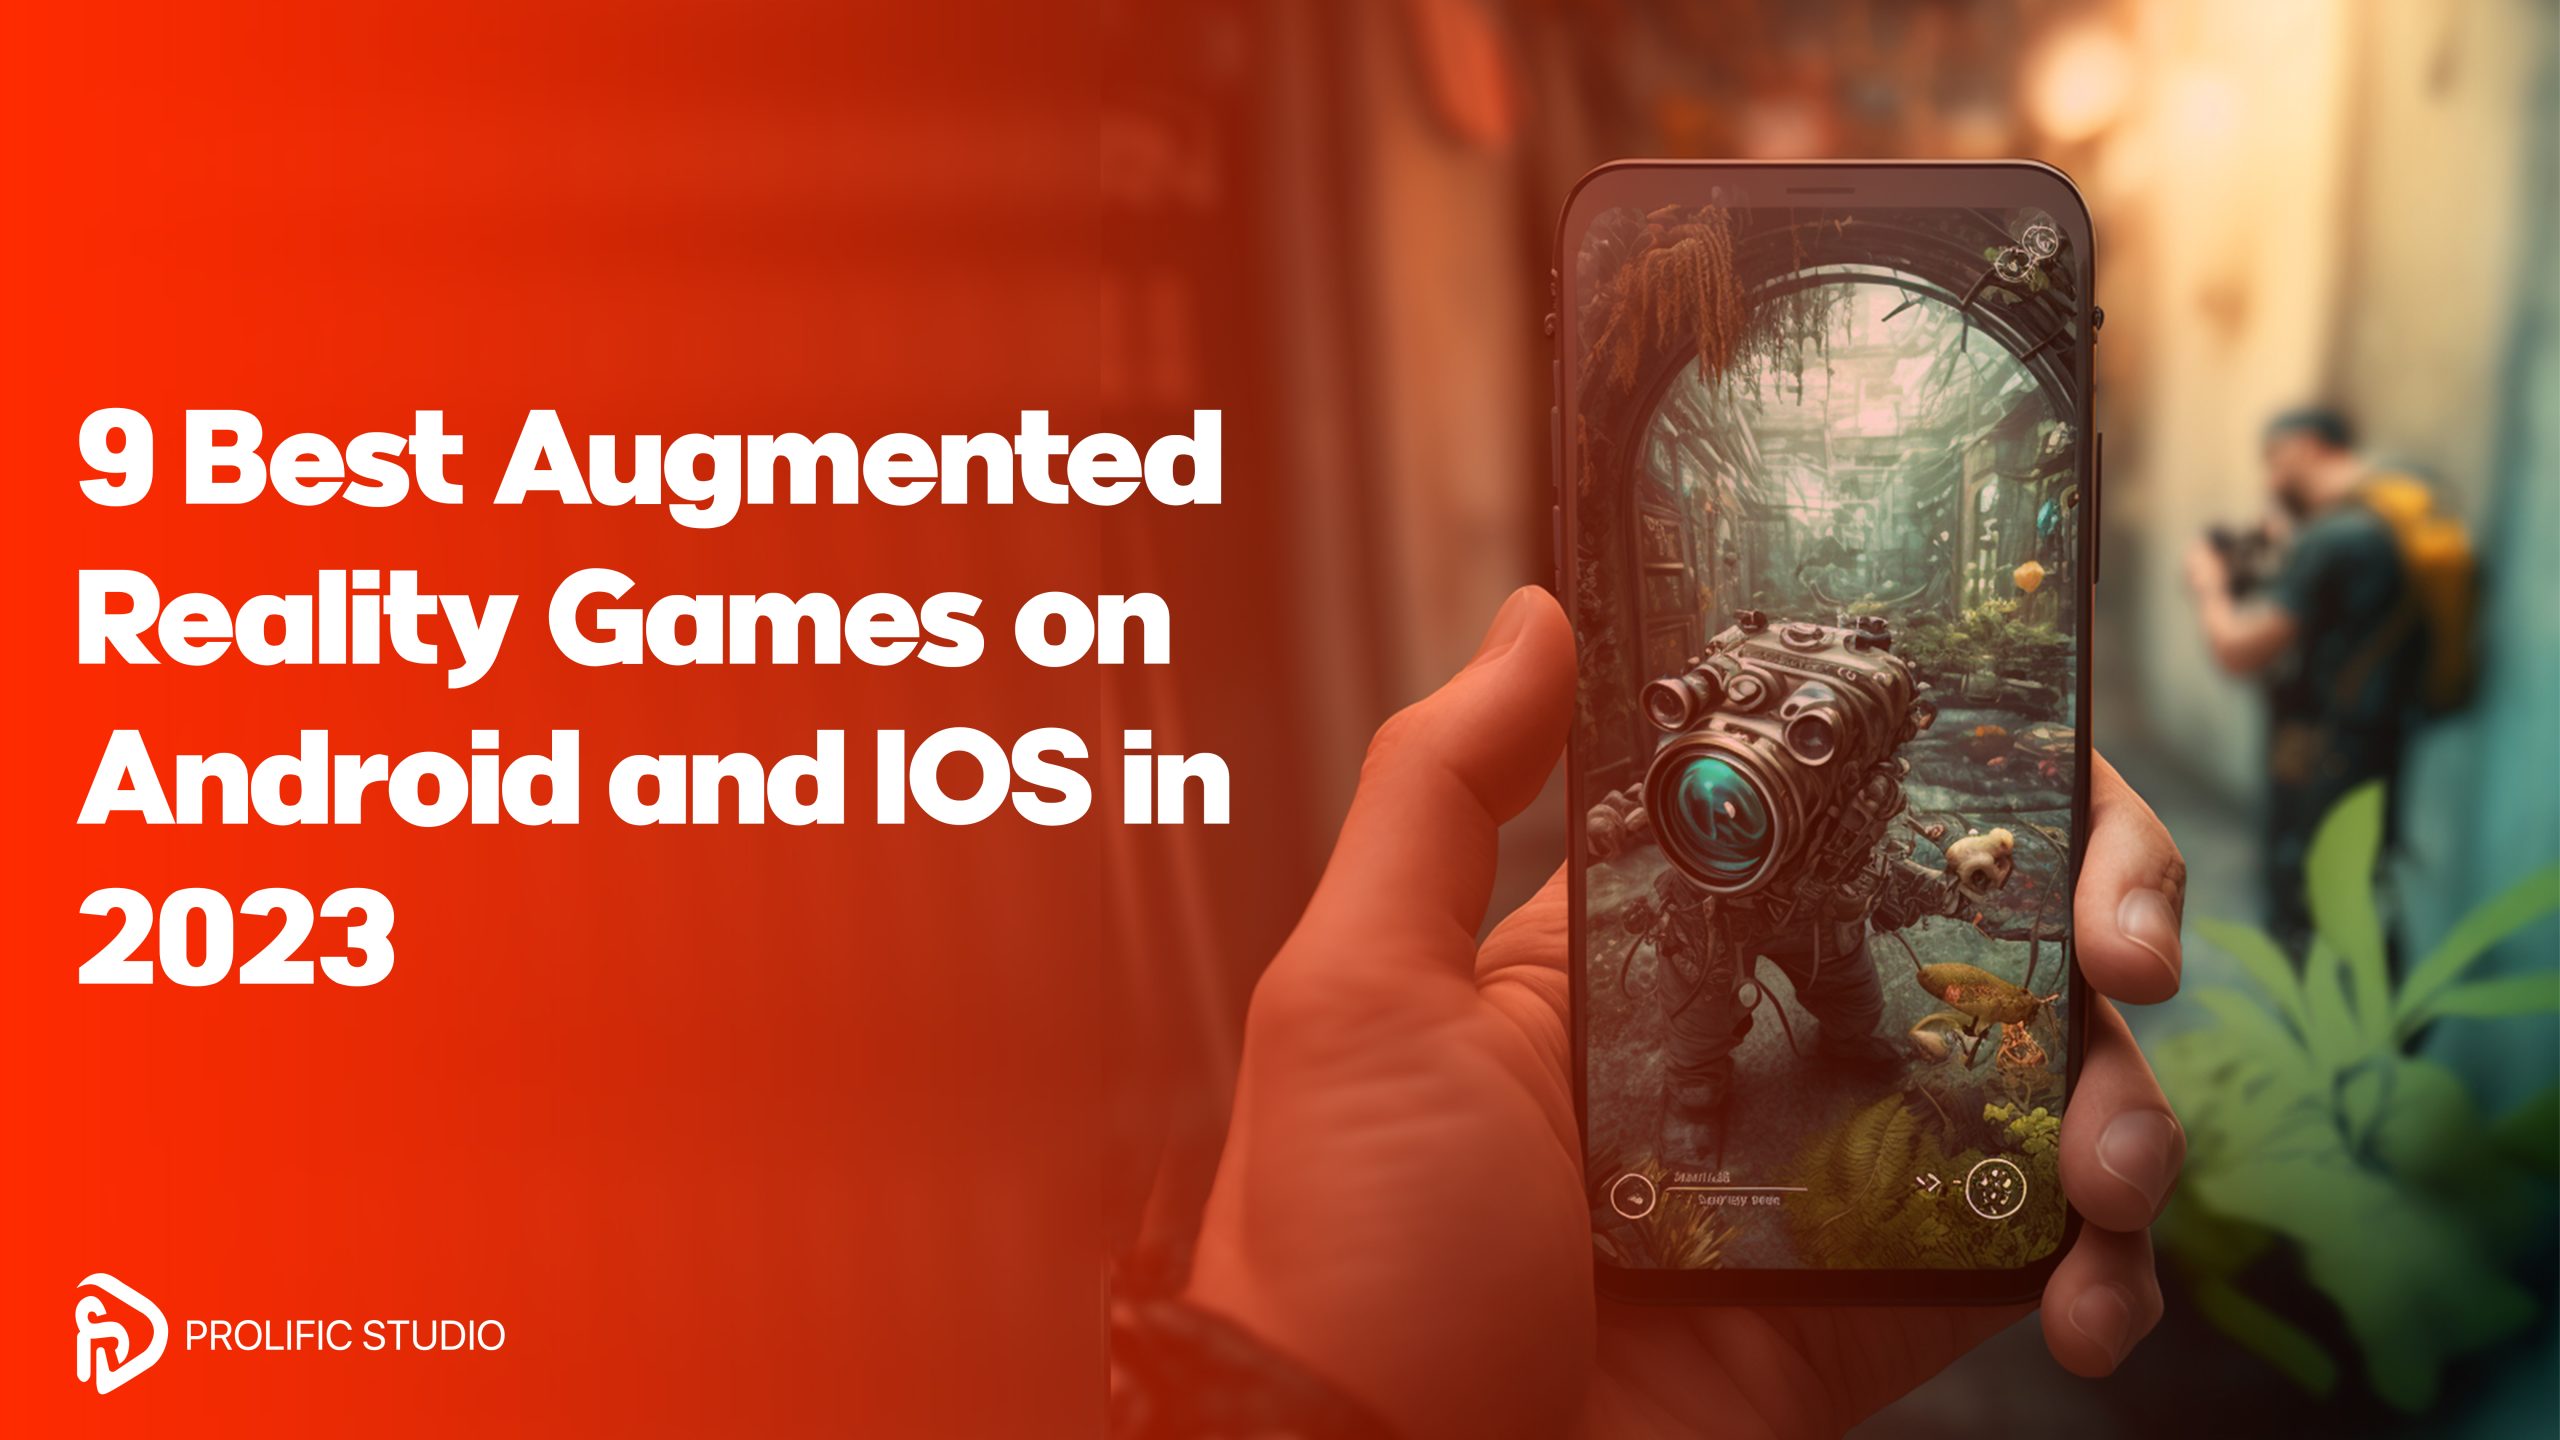 Gamers Unite! IOS - Share mobile games tips and videos!